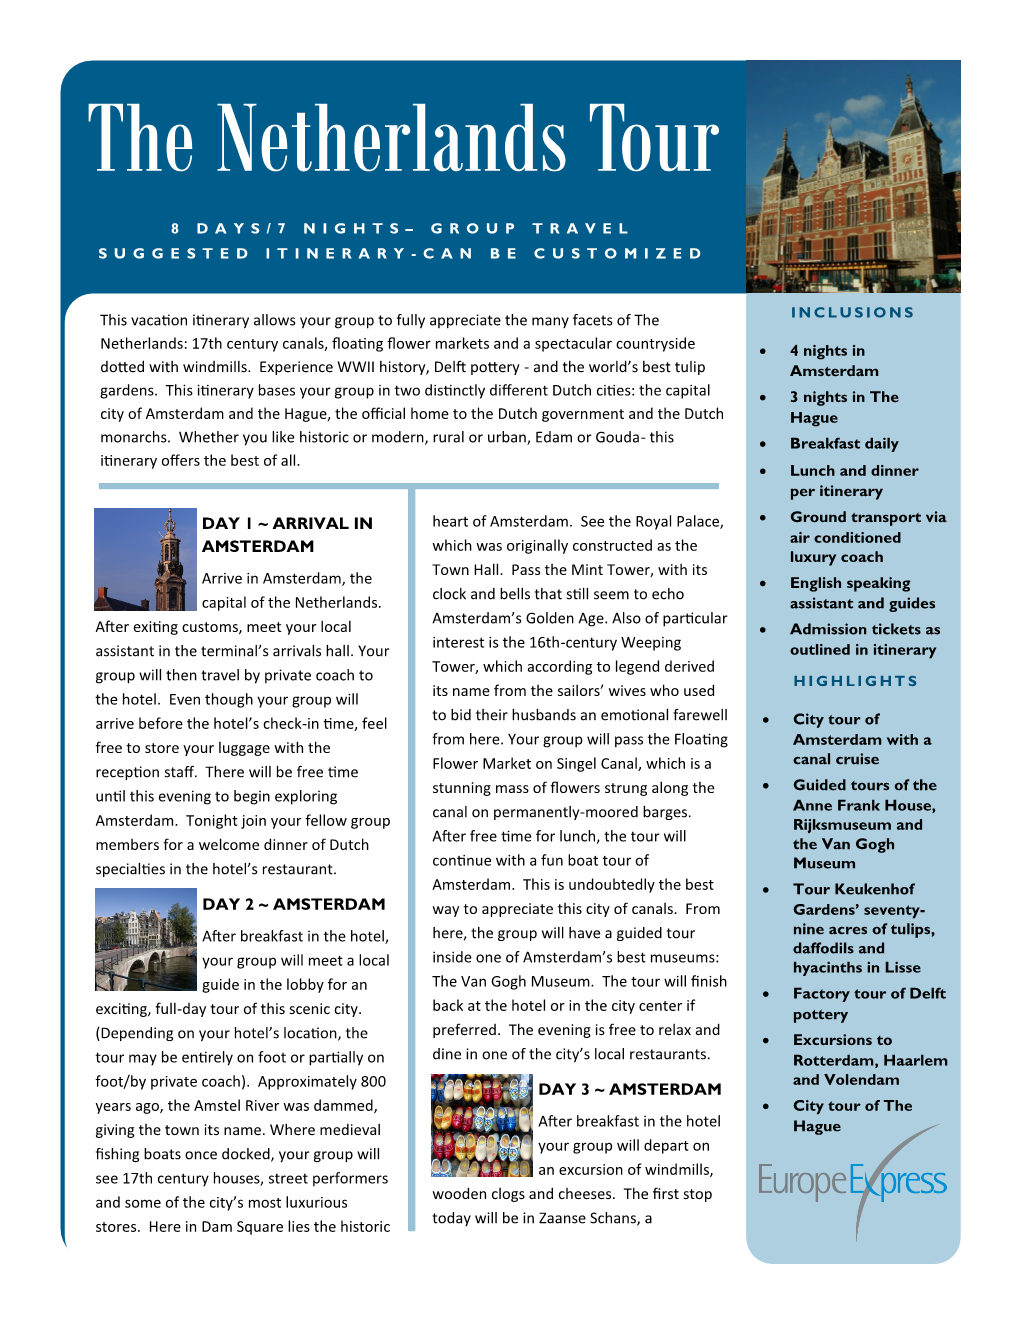 The Netherlands Tour